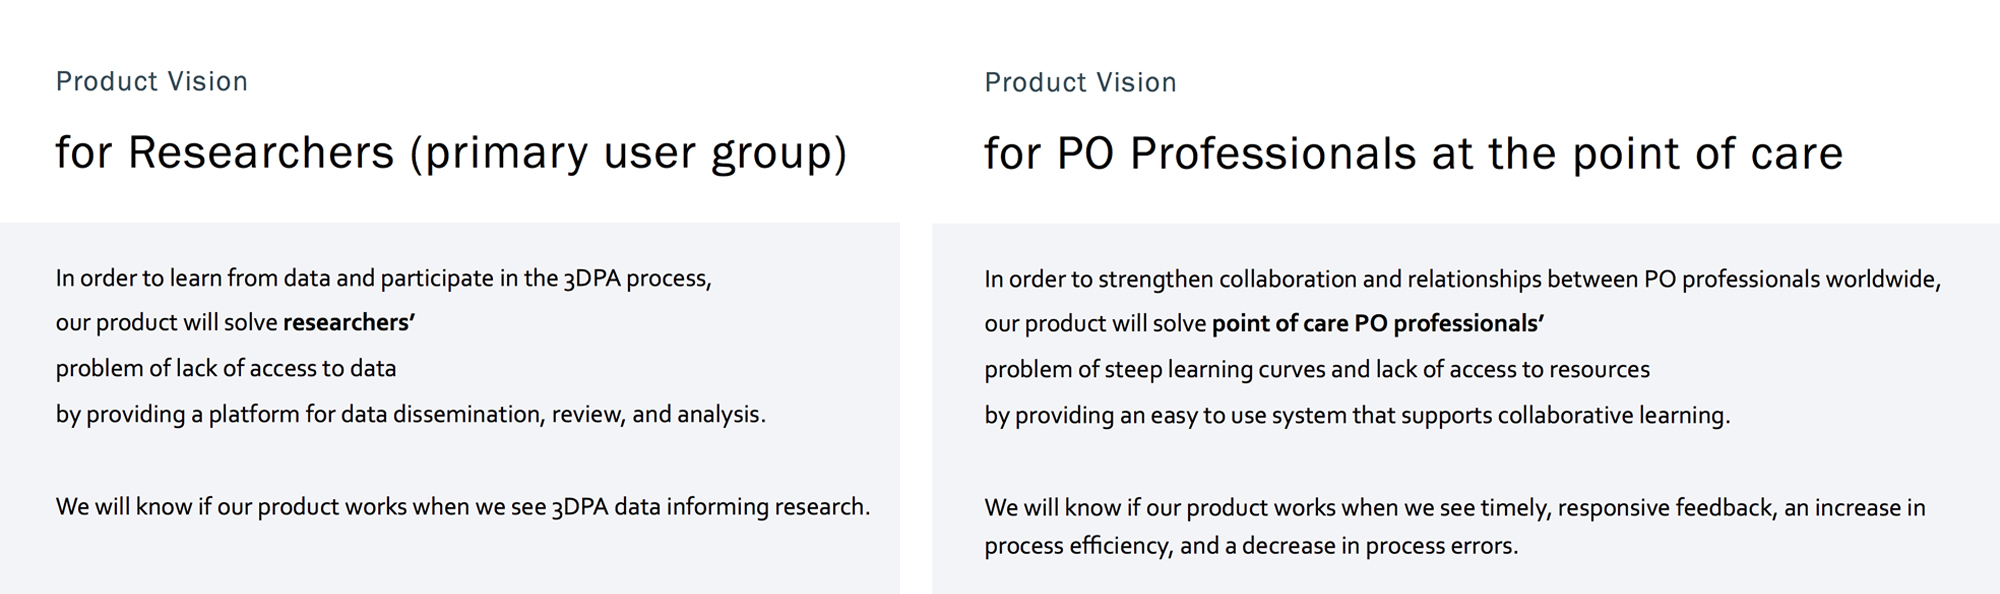 Product vision statements for researchers and P&O professionals at the point of care. Our product will solve researchers' problem of lack of access to data by providing a platform for data dissemination, review, and analysis. We will know our product works when we see 3DPA data informing research. Our product will solve point of care profesionals' problem of steep learning curves and lack of access to resources by providing an easy to use system that supports collaborative learning. We will know our product works when we see timely, responsive feedback, an increase in process efficiency, and a decrease in process errors.